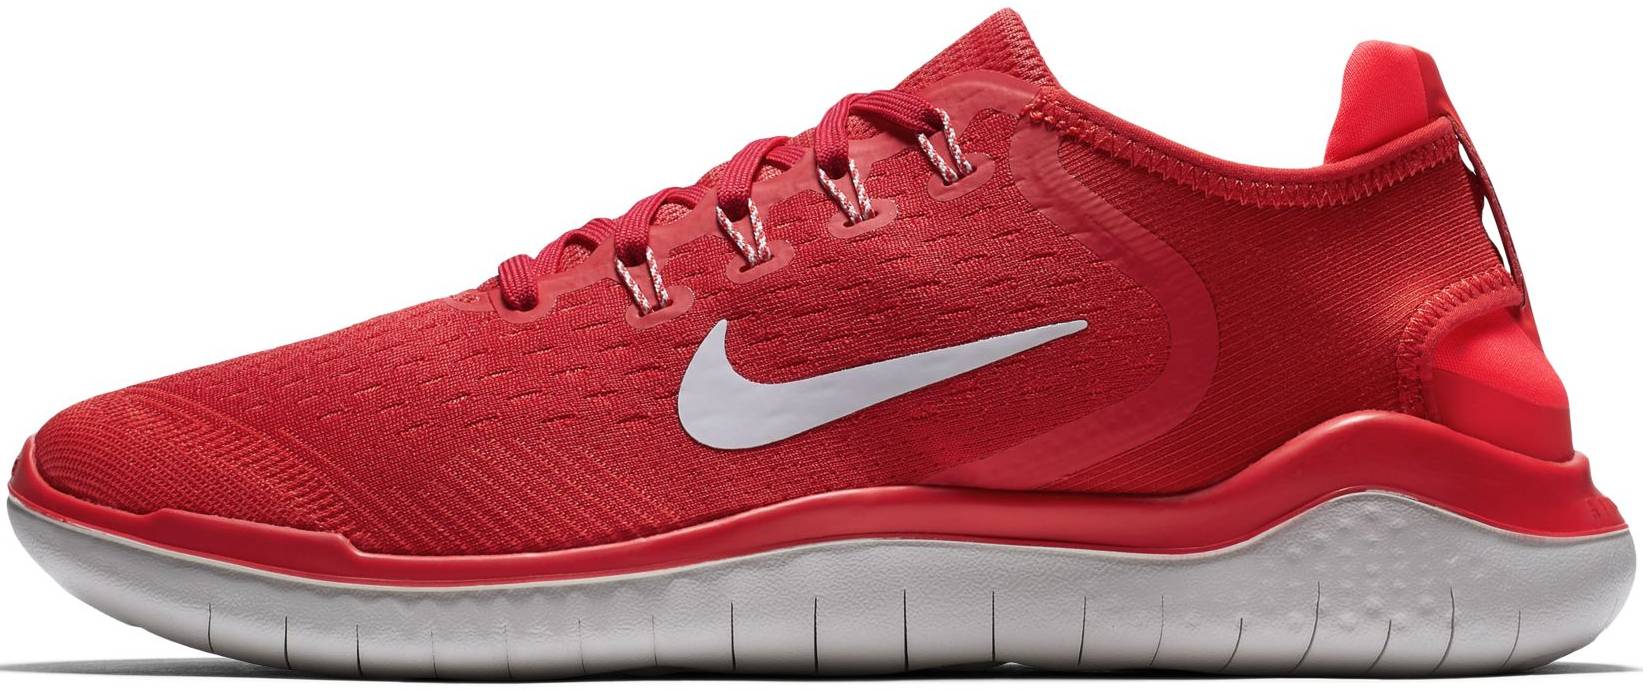 red sports shoes nike